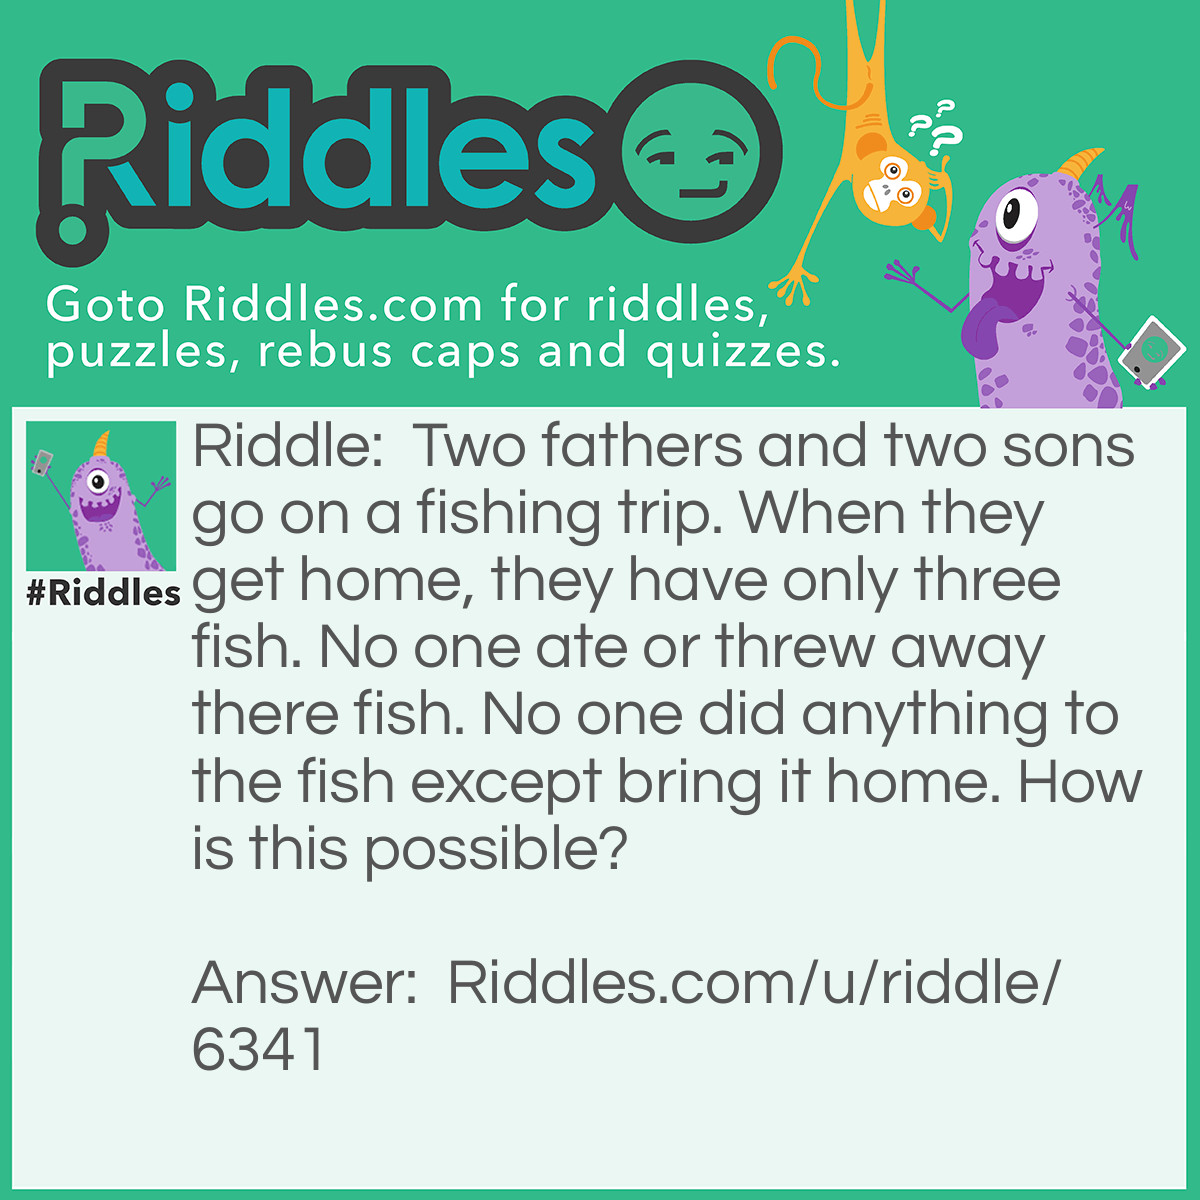 Riddle: Two fathers and two sons go on a fishing trip. When they get home, they have only three fish. No one ate or threw away there fish. No one did anything to the fish except bring it home. How is this possible? Answer: There were only three people. A grandfather, a father, and a son. The grandfather is that father of the father who is the son of the father. The father is the son of the grandfather